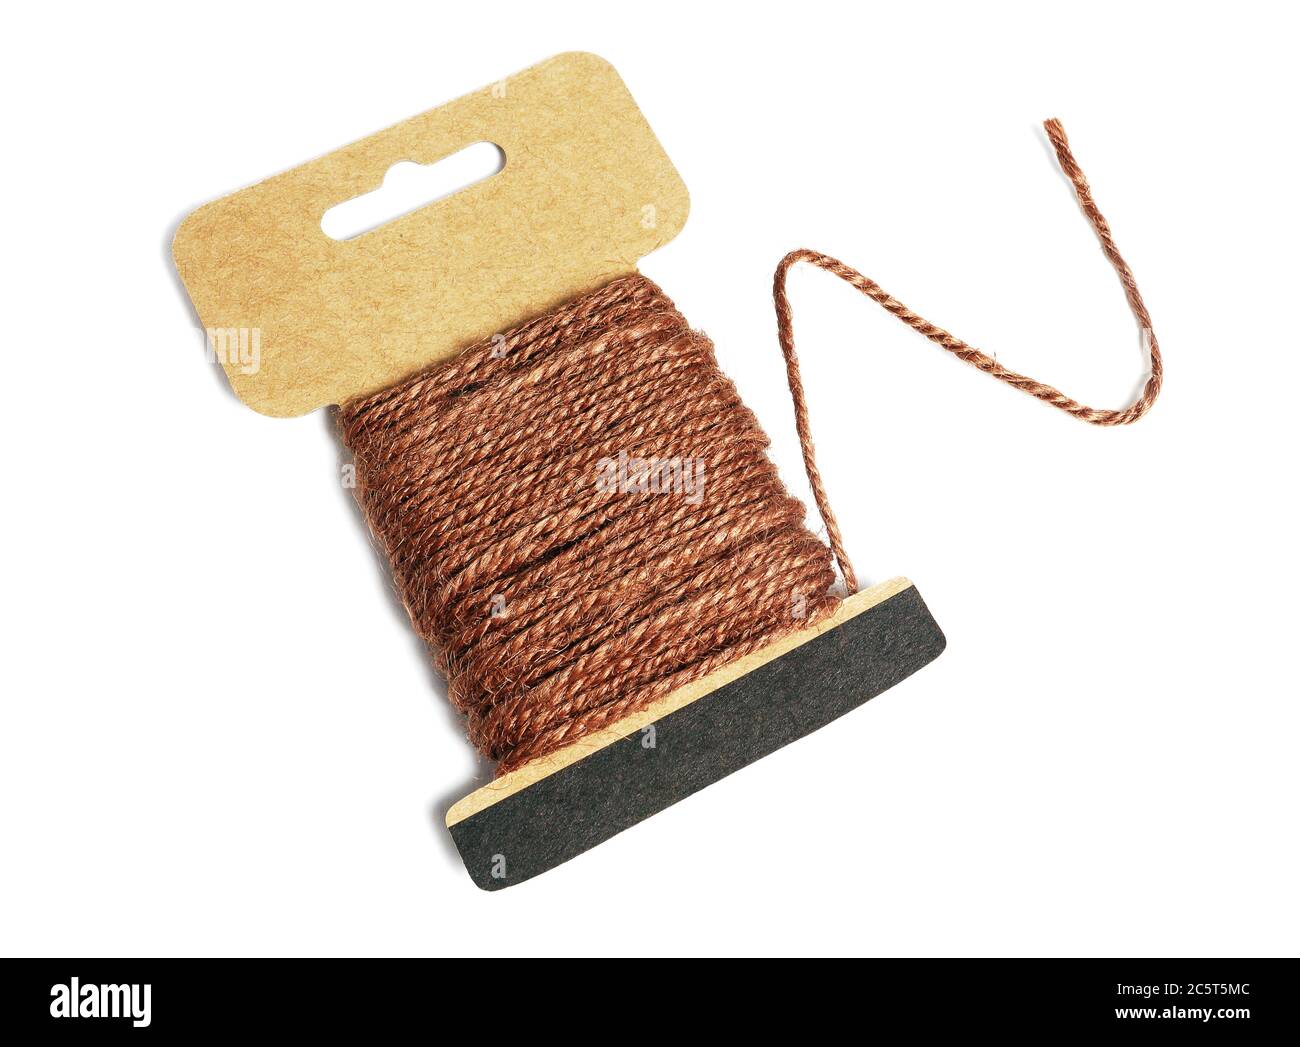 Hemp Rope Wound Up on Card With Loose End on white Background Stock Photo